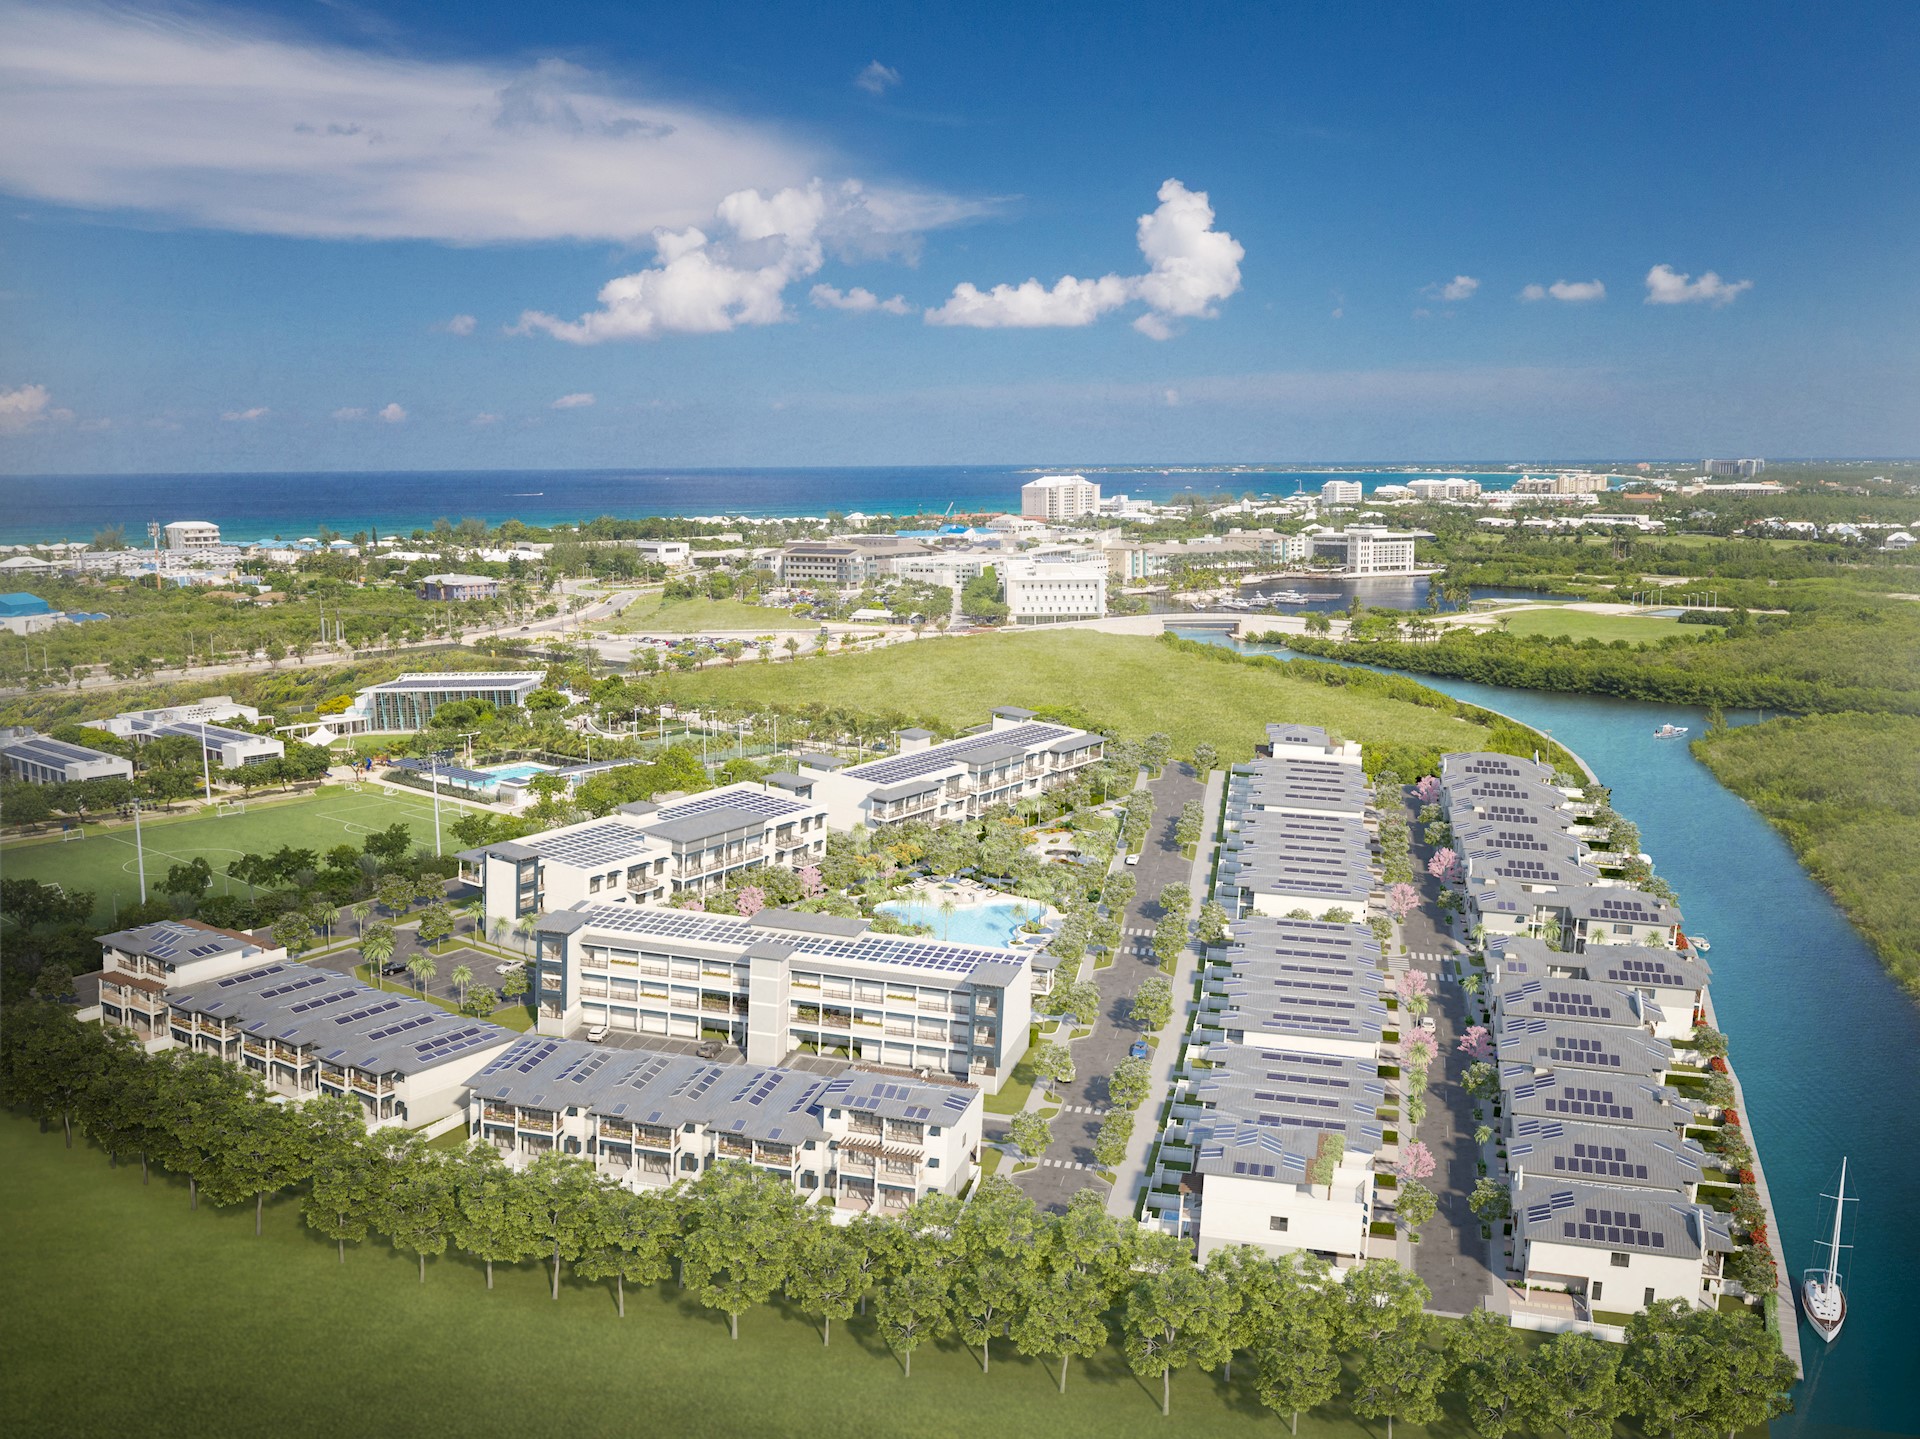 Media Release: Dart Real Estate and NCB present OLEA: The first for-sale residential development at Camana Bay